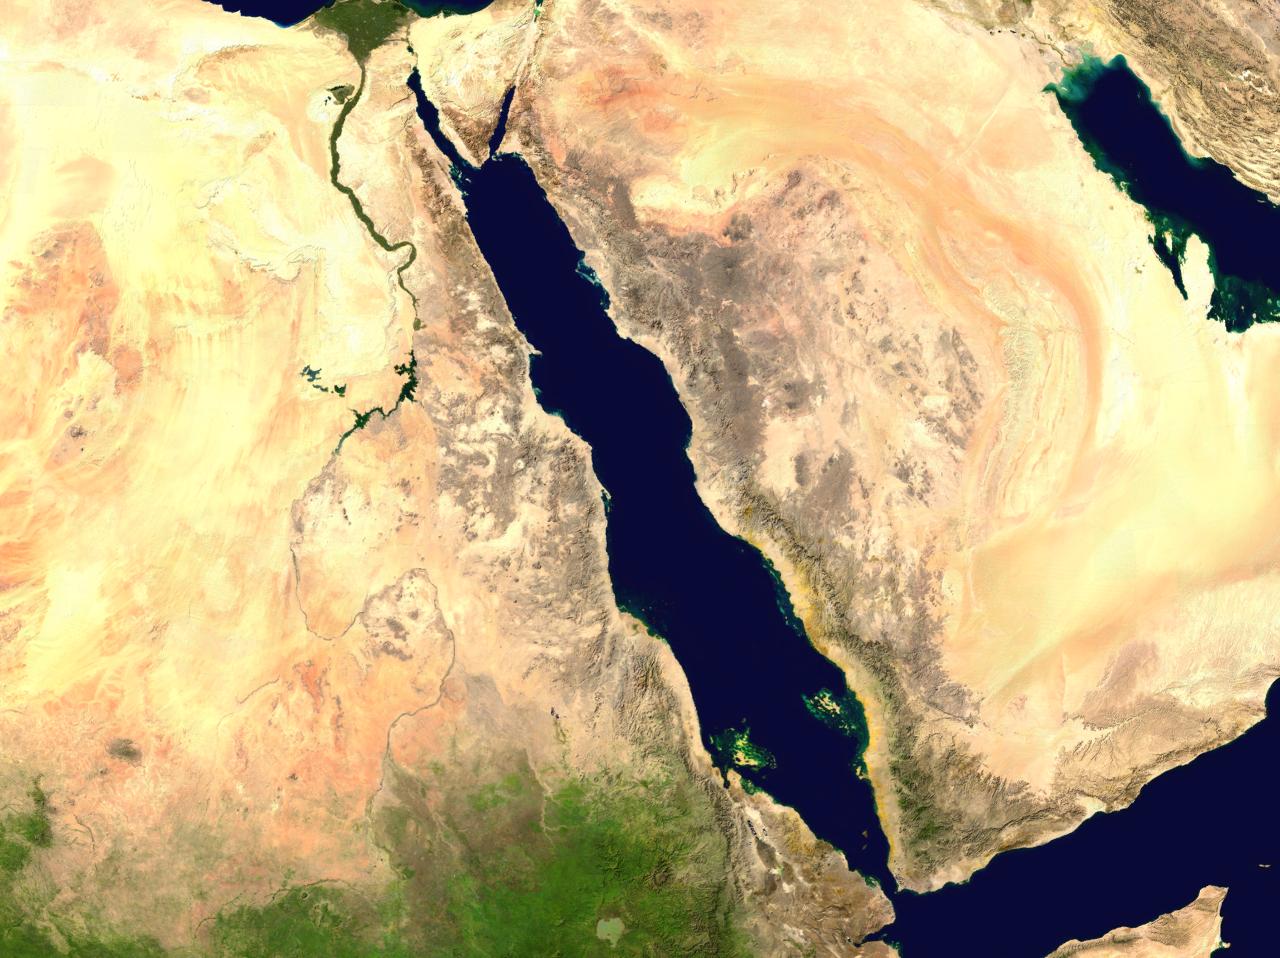 Eritrea: The Red Sea Is Slipping into Total Arab Control